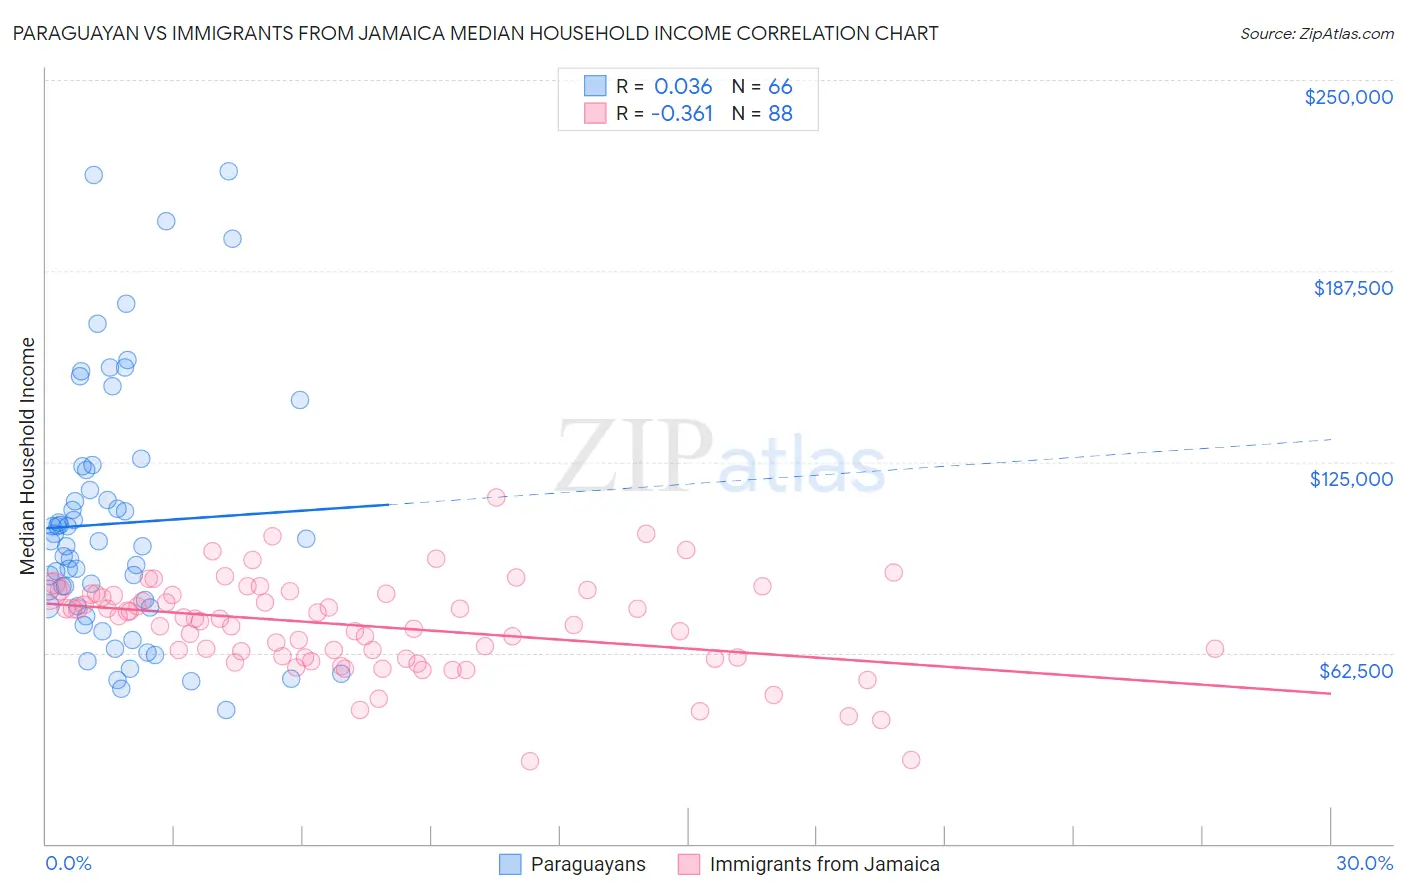 Paraguayan vs Immigrants from Jamaica Median Household Income